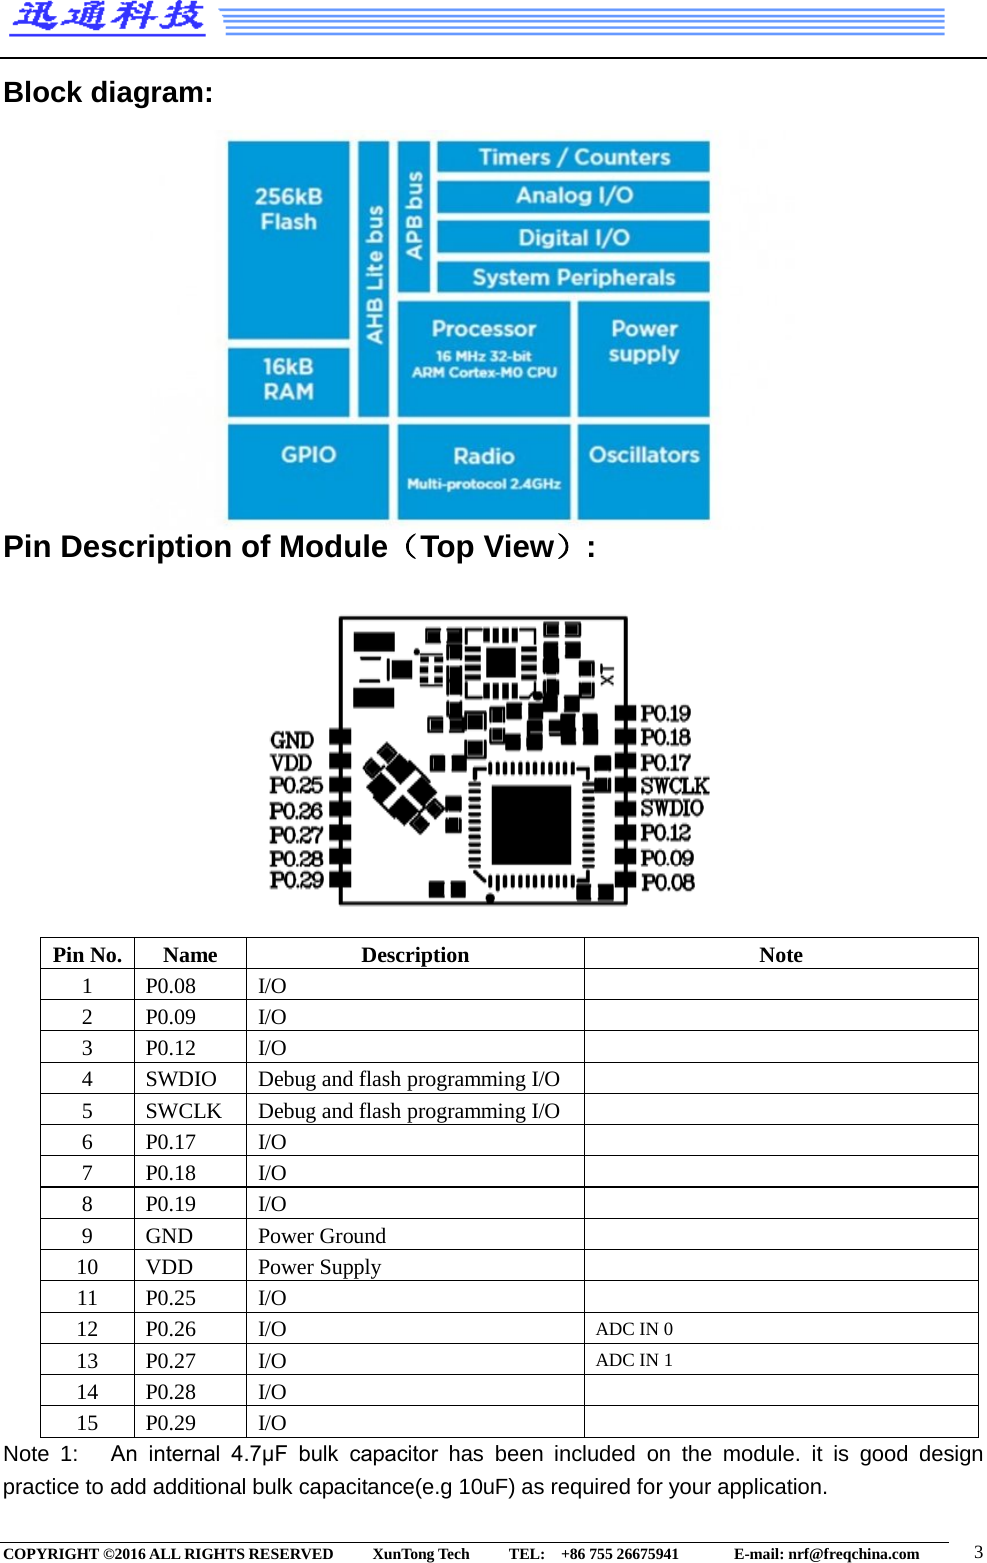  Block diagram:               Pin Description of Module（Top View）:            Pin No. Name Description Note 1 P0.08 I/O  2 P0.09 I/O  3 P0.12 I/O  4 SWDIO Debug and flash programming I/O  5 SWCLK Debug and flash programming I/O  6 P0.17 I/O  7 P0.18   I/O  8 P0.19 I/O  9 GND Power Ground  10 VDD Power Supply  11 P0.25 I/O  12 P0.26 I/O ADC IN 0 13 P0.27 I/O ADC IN 1 14 P0.28 I/O  15 P0.29 I/O  Note  1:   An  internal  4.7μF  bulk  capacitor  has been included on the module. it is good design practice to add additional bulk capacitance(e.g 10uF) as required for your application. COPYRIGHT ©2016 ALL RIGHTS RESERVED      XunTong Tech     TEL:  +86 755 26675941        E-mail: nrf@freqchina.com  3 